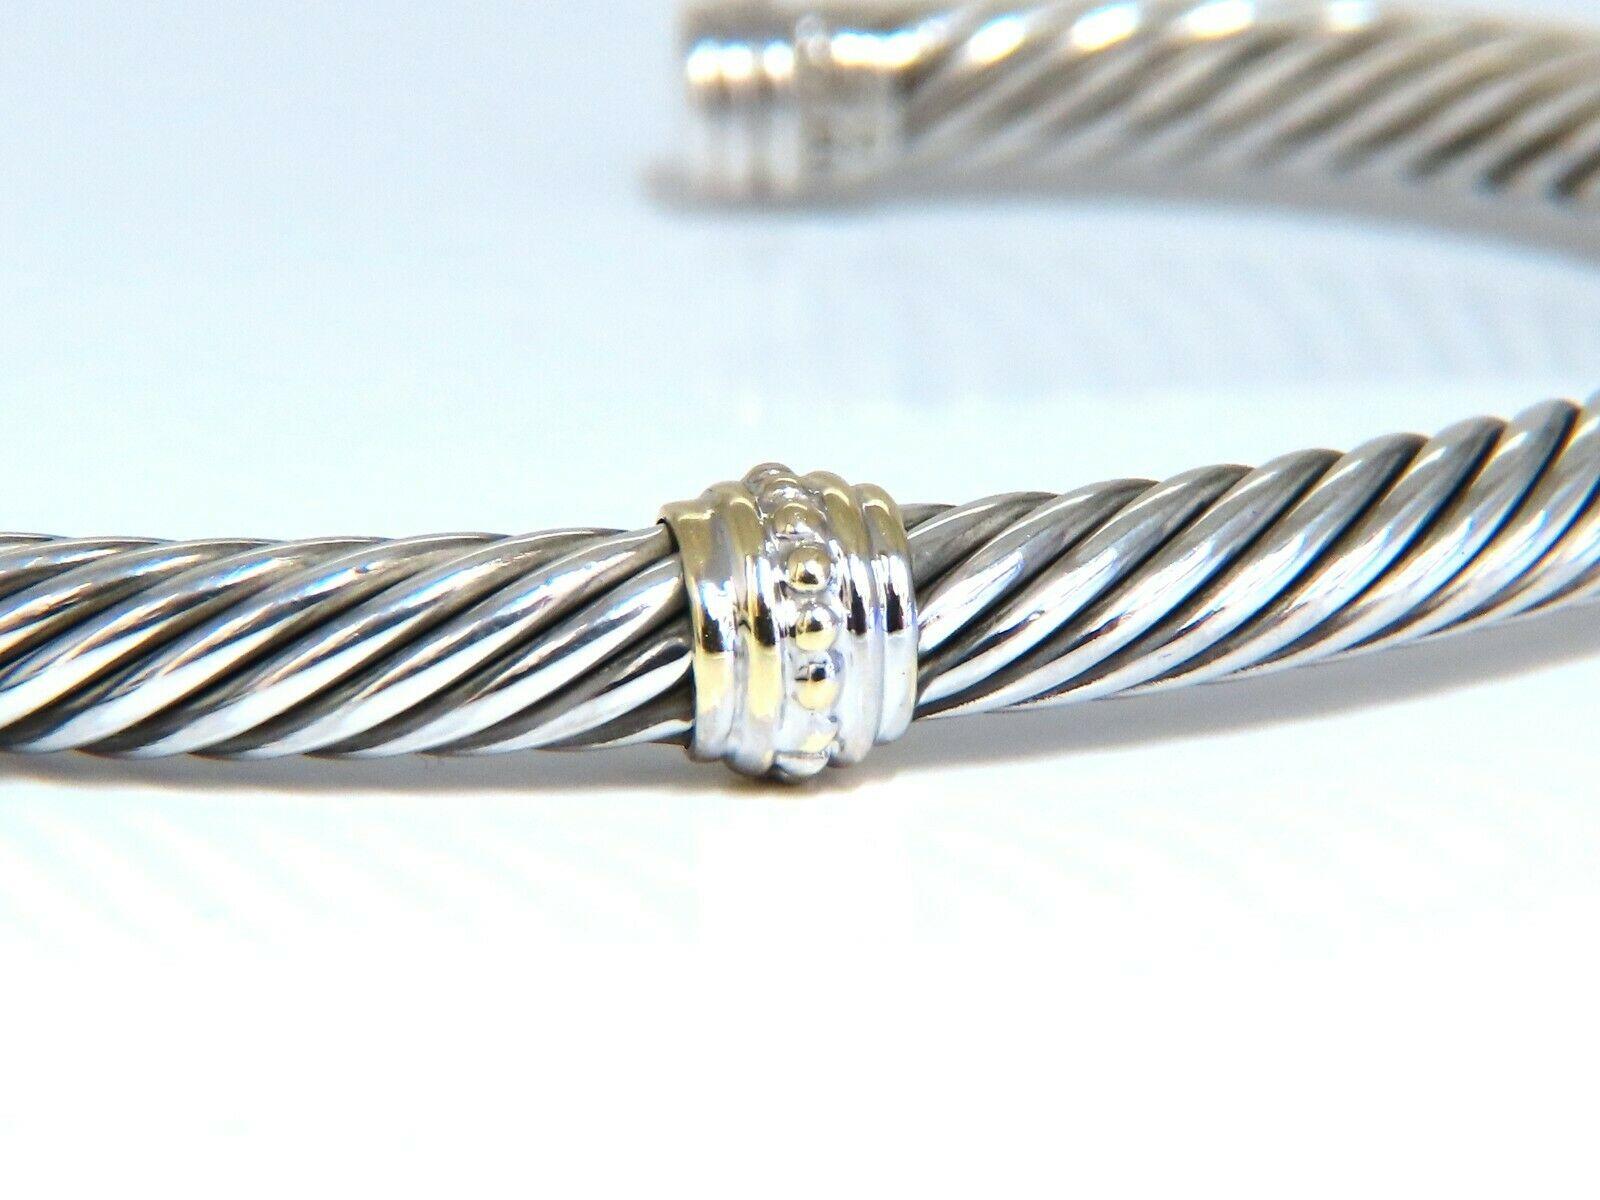 Sterling Silver Cable bangle Bracelet

5.2mm link

Sterling silver 16 grams

Free Insured overnight shipping.

All Items come with a Free White ribbon gift box.